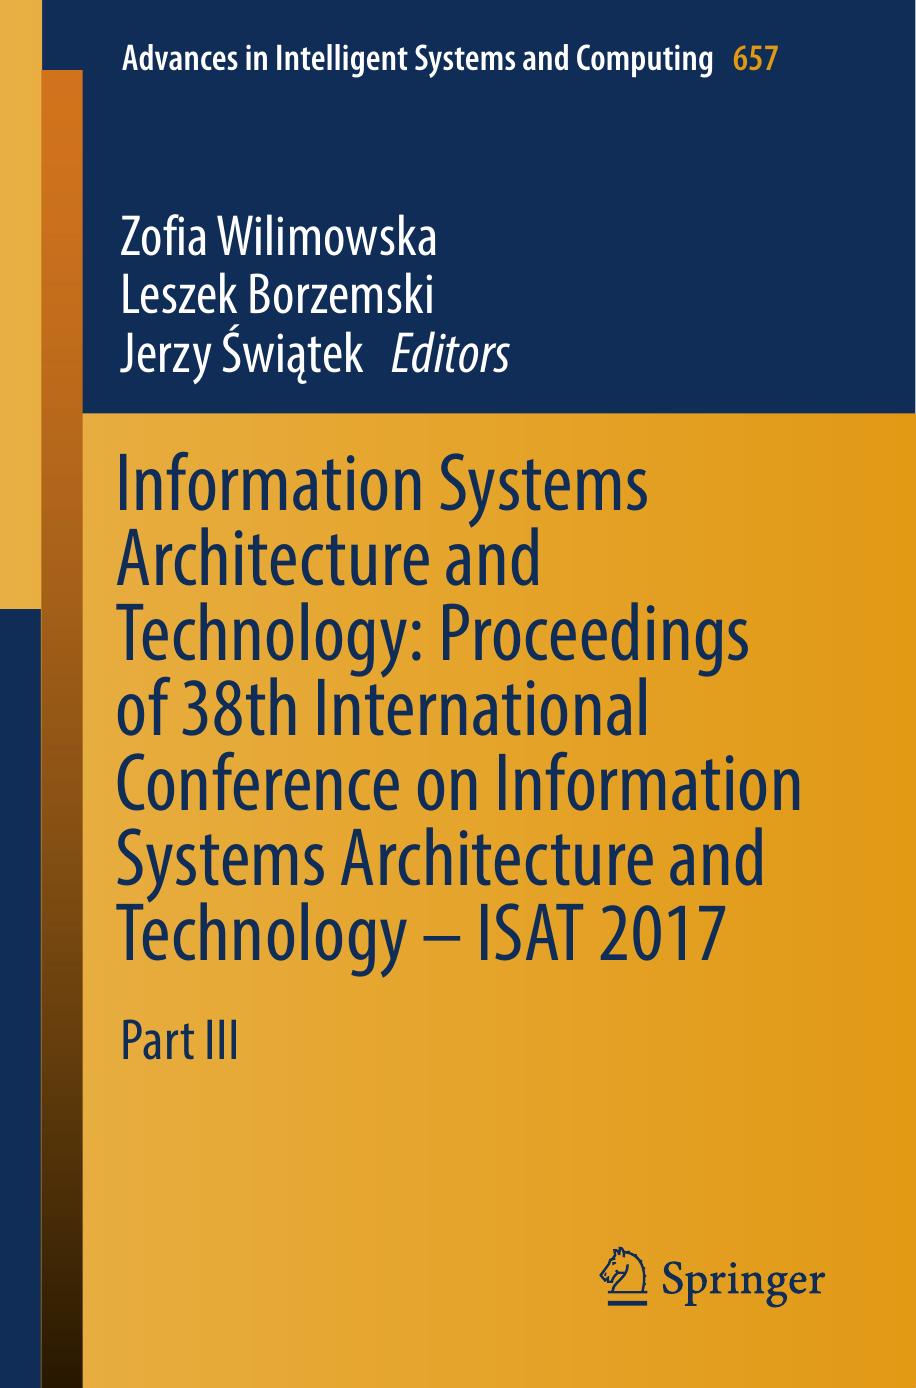 Information systems architecture and technology   proceedings of 38th International Confere- ISAT 2017. Part III ( PDFDrive )